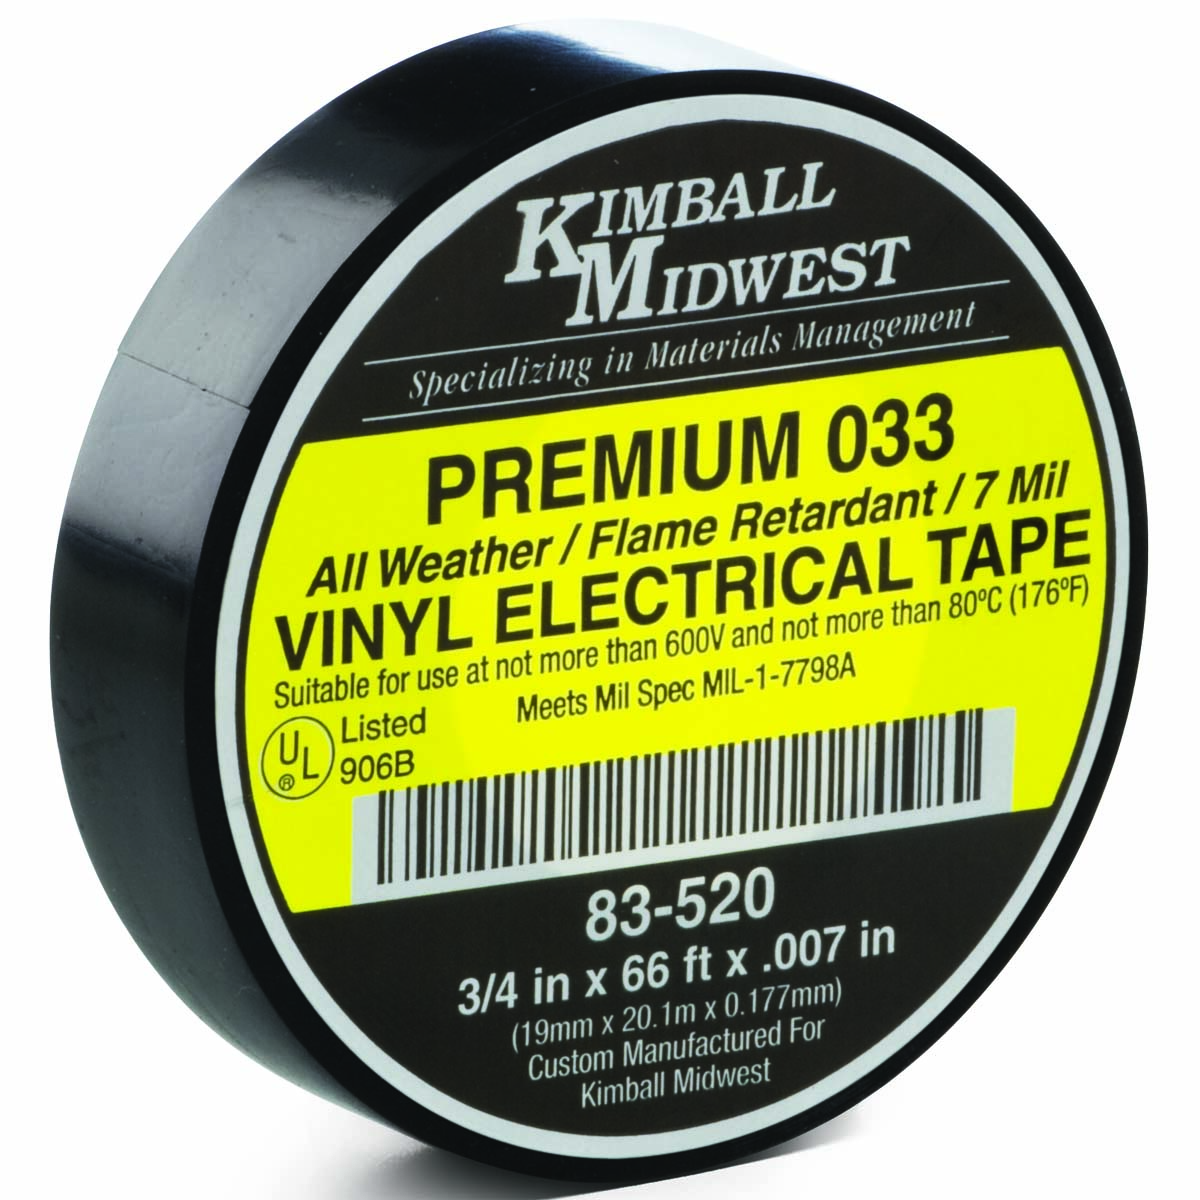 Premium 033 Electrical Tape - Kimball Midwest